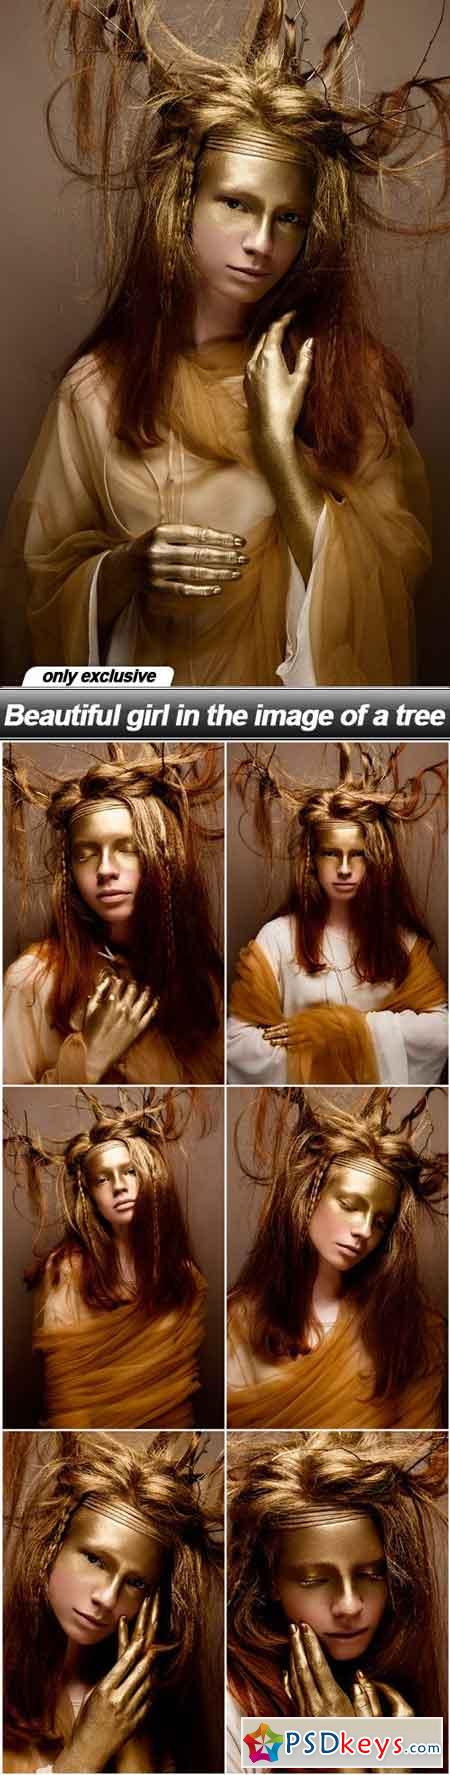 Beautiful girl in the image of a tree - 7 UHQ JPEG